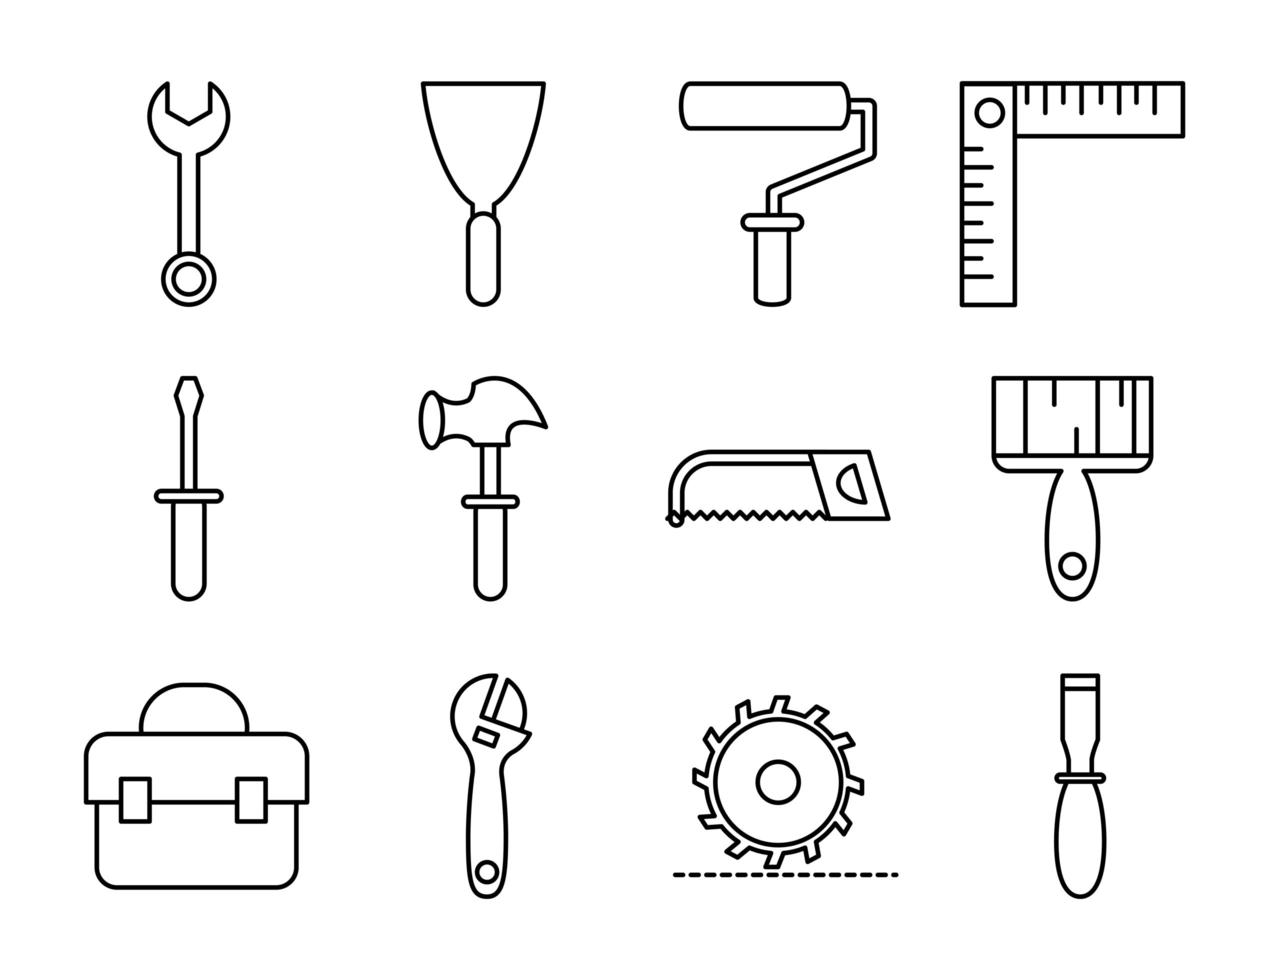 tool repair maintenance and construction equipment icons set line style icon vector